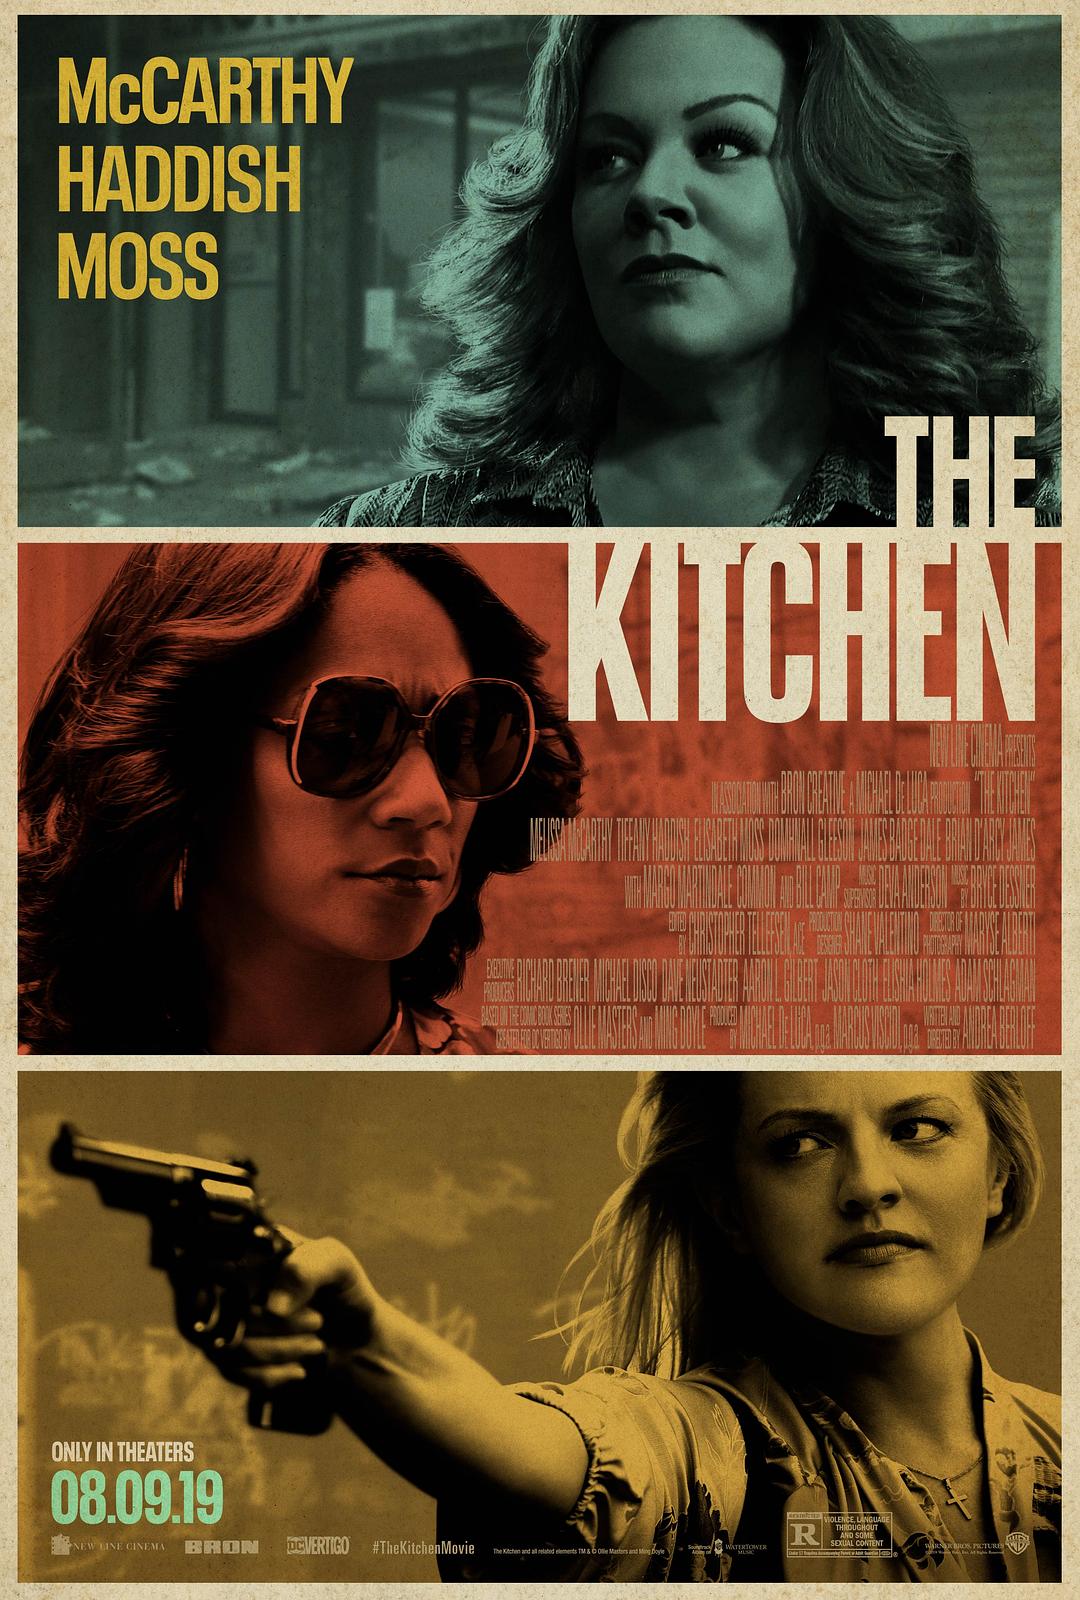  The.Kitchen.2019.720p.BluRay.x264-DRONES 4.38GB-1.png